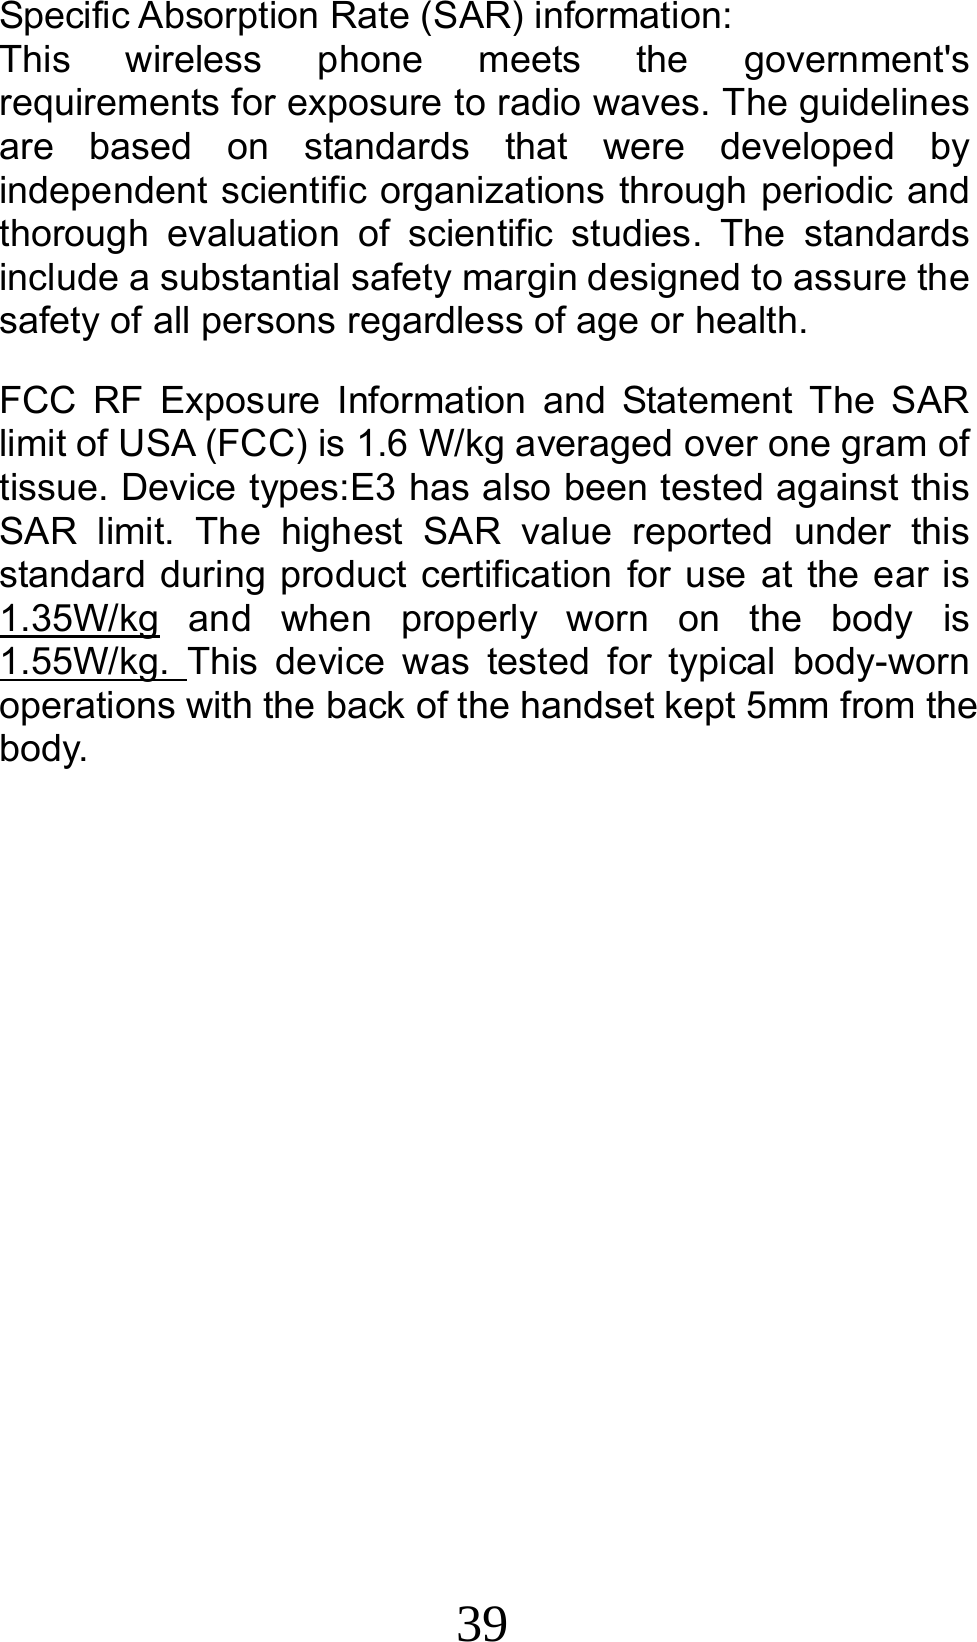 39  Specific Absorption Rate (SAR) information: This wireless phone meets the government&apos;s requirements for exposure to radio waves. The guidelines are based on standards that were developed by independent scientific organizations through periodic and thorough evaluation of scientific studies. The standards include a substantial safety margin designed to assure the safety of all persons regardless of age or health. FCC RF Exposure Information and Statement The SAR limit of USA (FCC) is 1.6 W/kg averaged over one gram of tissue. Device types:E3 has also been tested against this SAR limit. The highest SAR value reported under this standard during product certification for use at the ear is 1.35W/kg and when properly worn on the body is 1.55W/kg.  This device was tested for typical body-worn operations with the back of the handset kept 5mm from the body. 